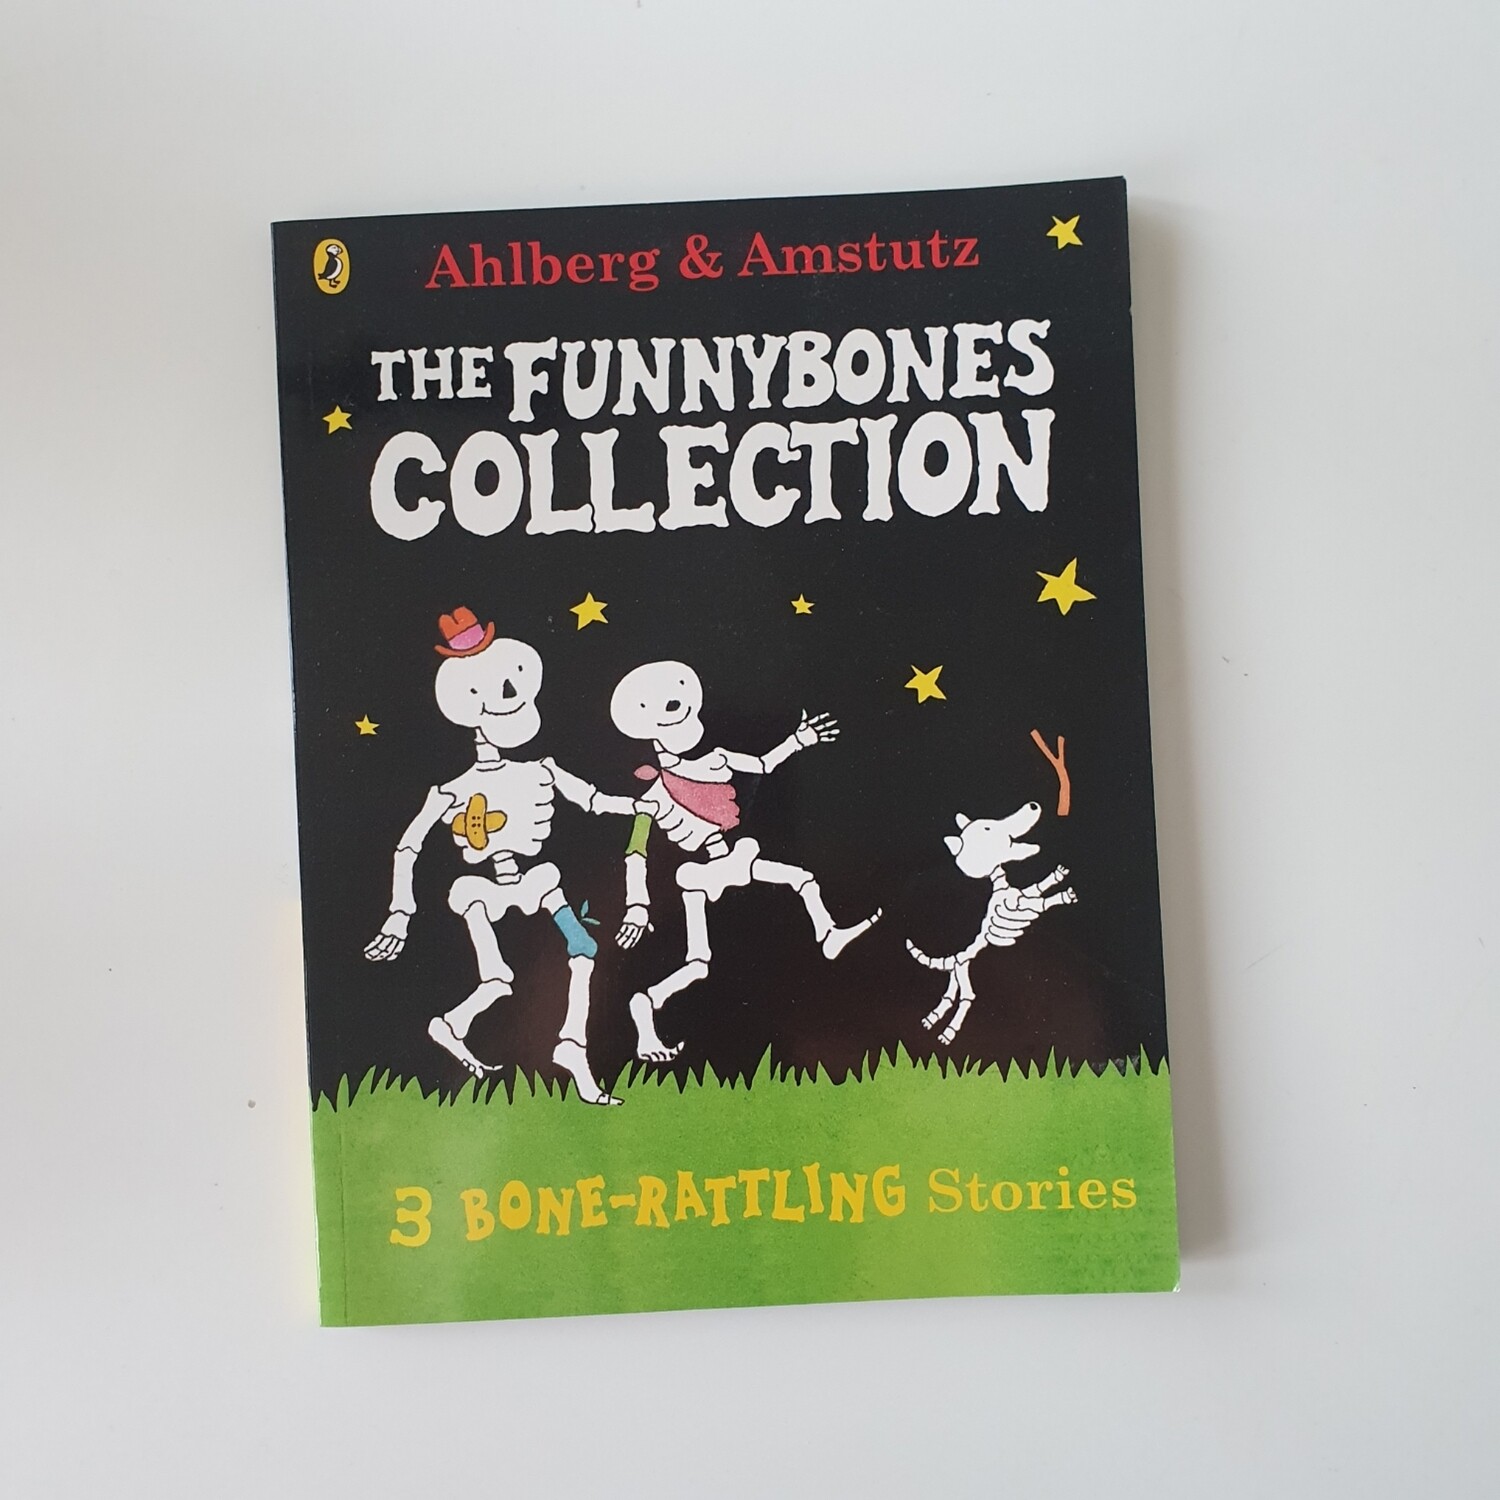 The Funnybones Collection Notebook - made from a paperback book